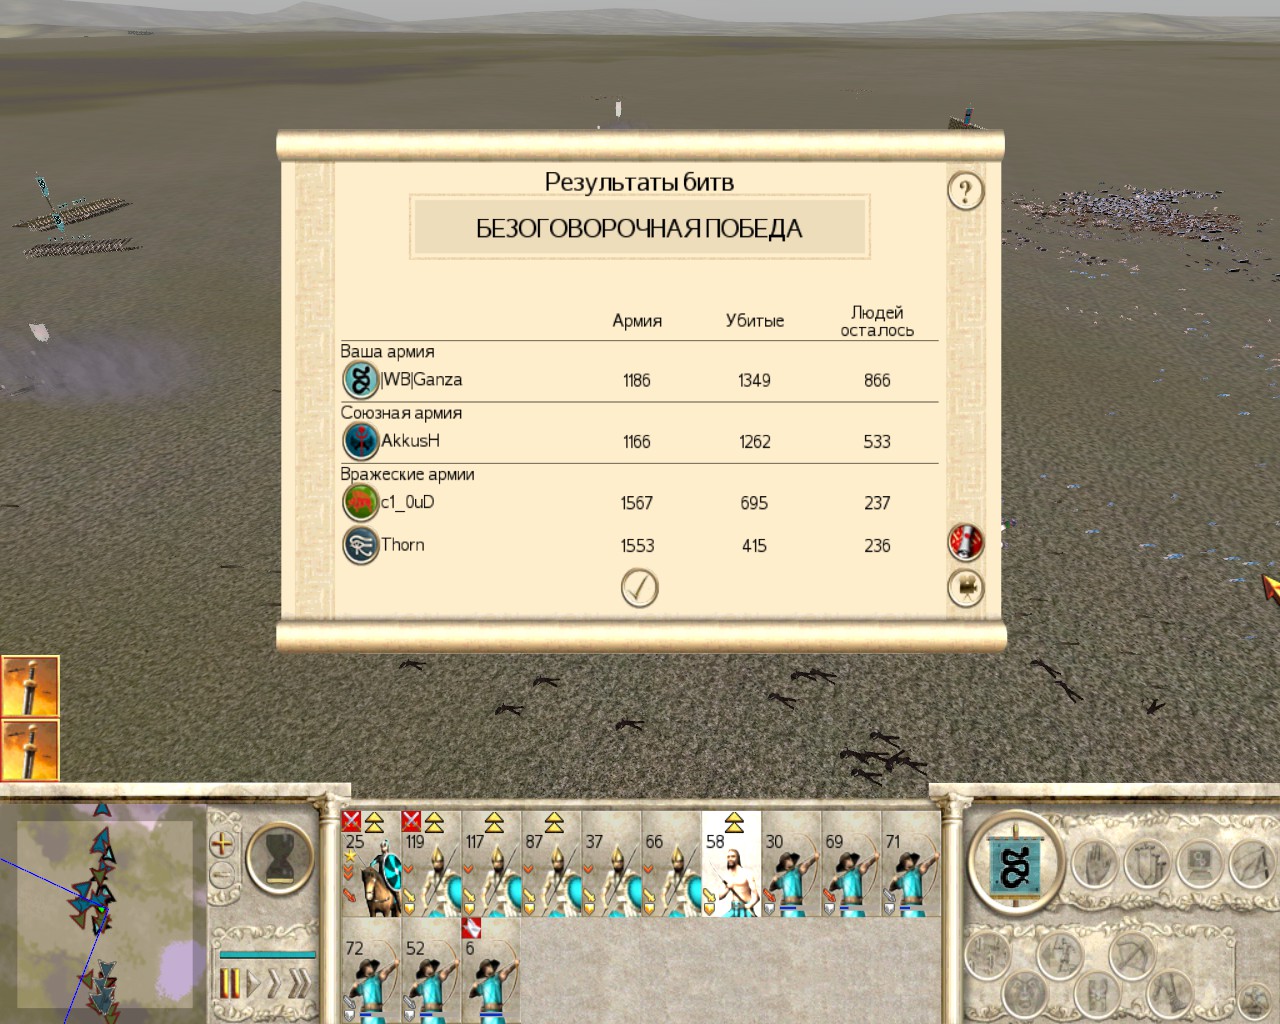 rome total war gold edition mss32.dll missing from computer